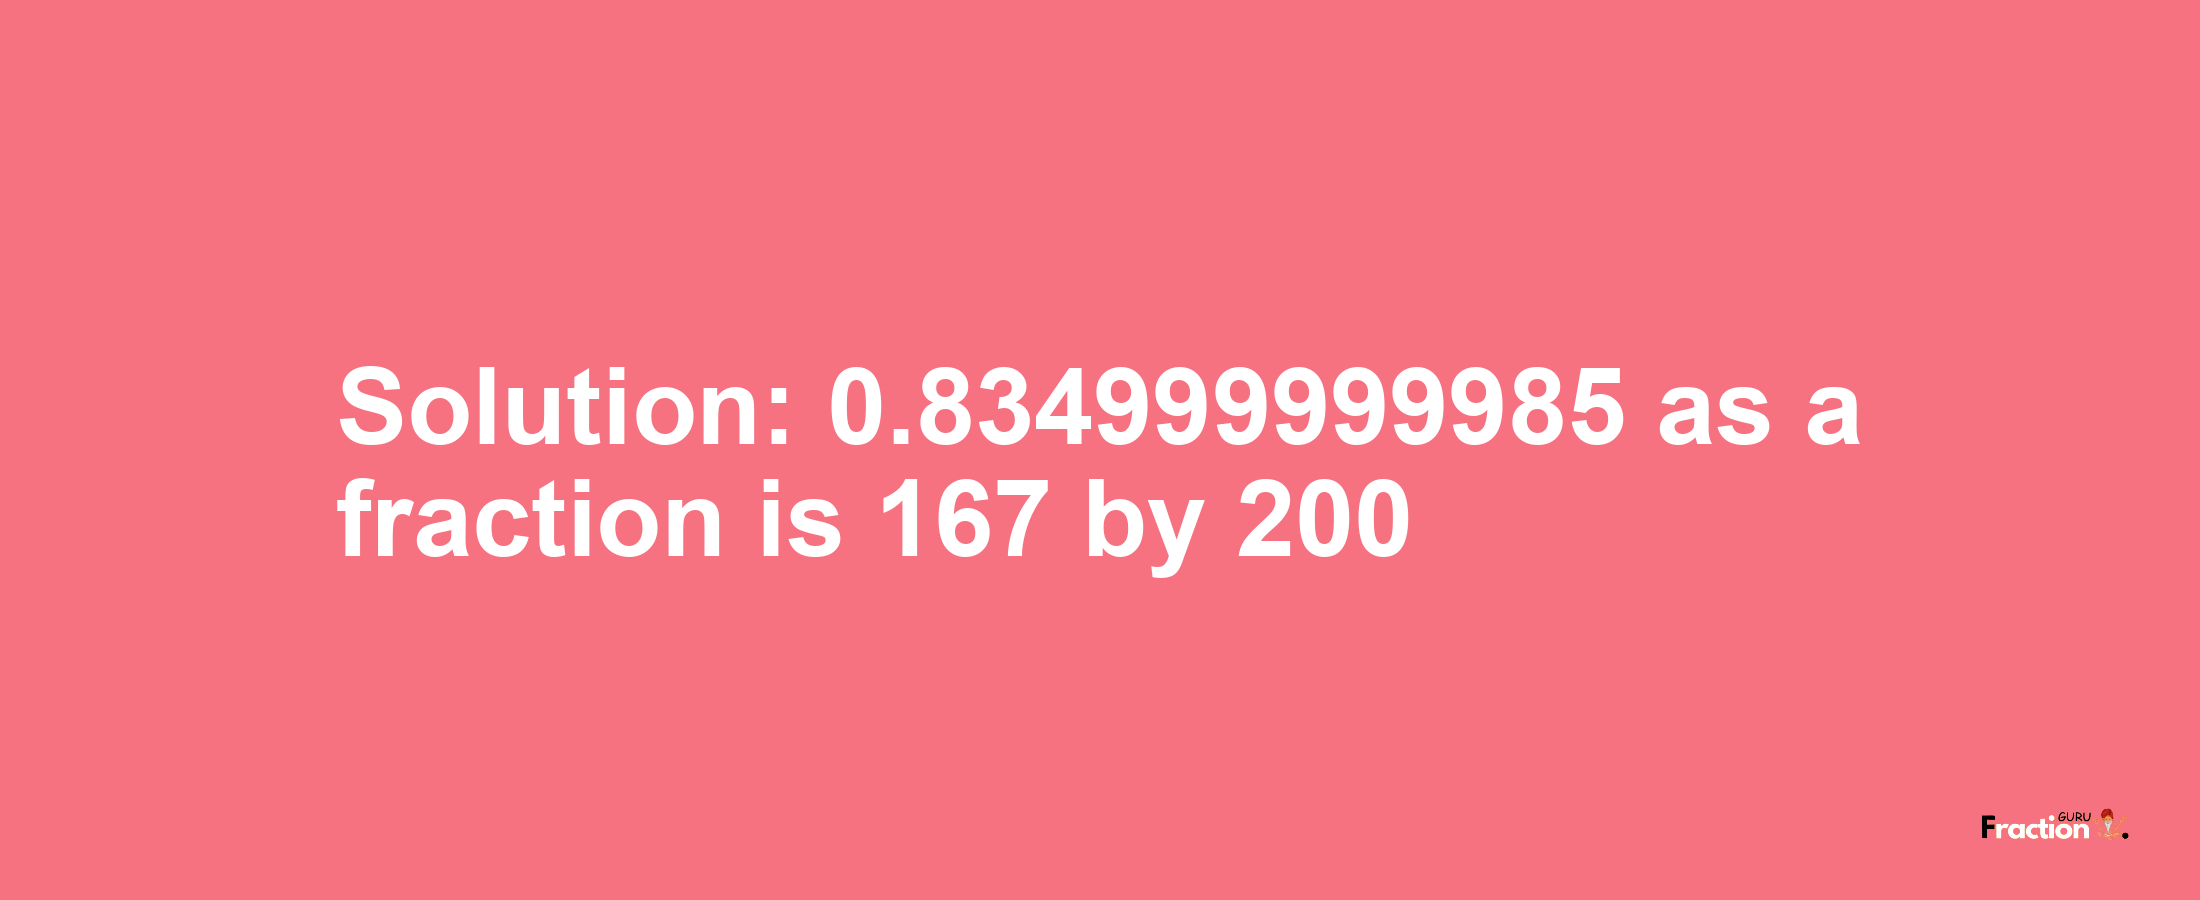 Solution:0.834999999985 as a fraction is 167/200